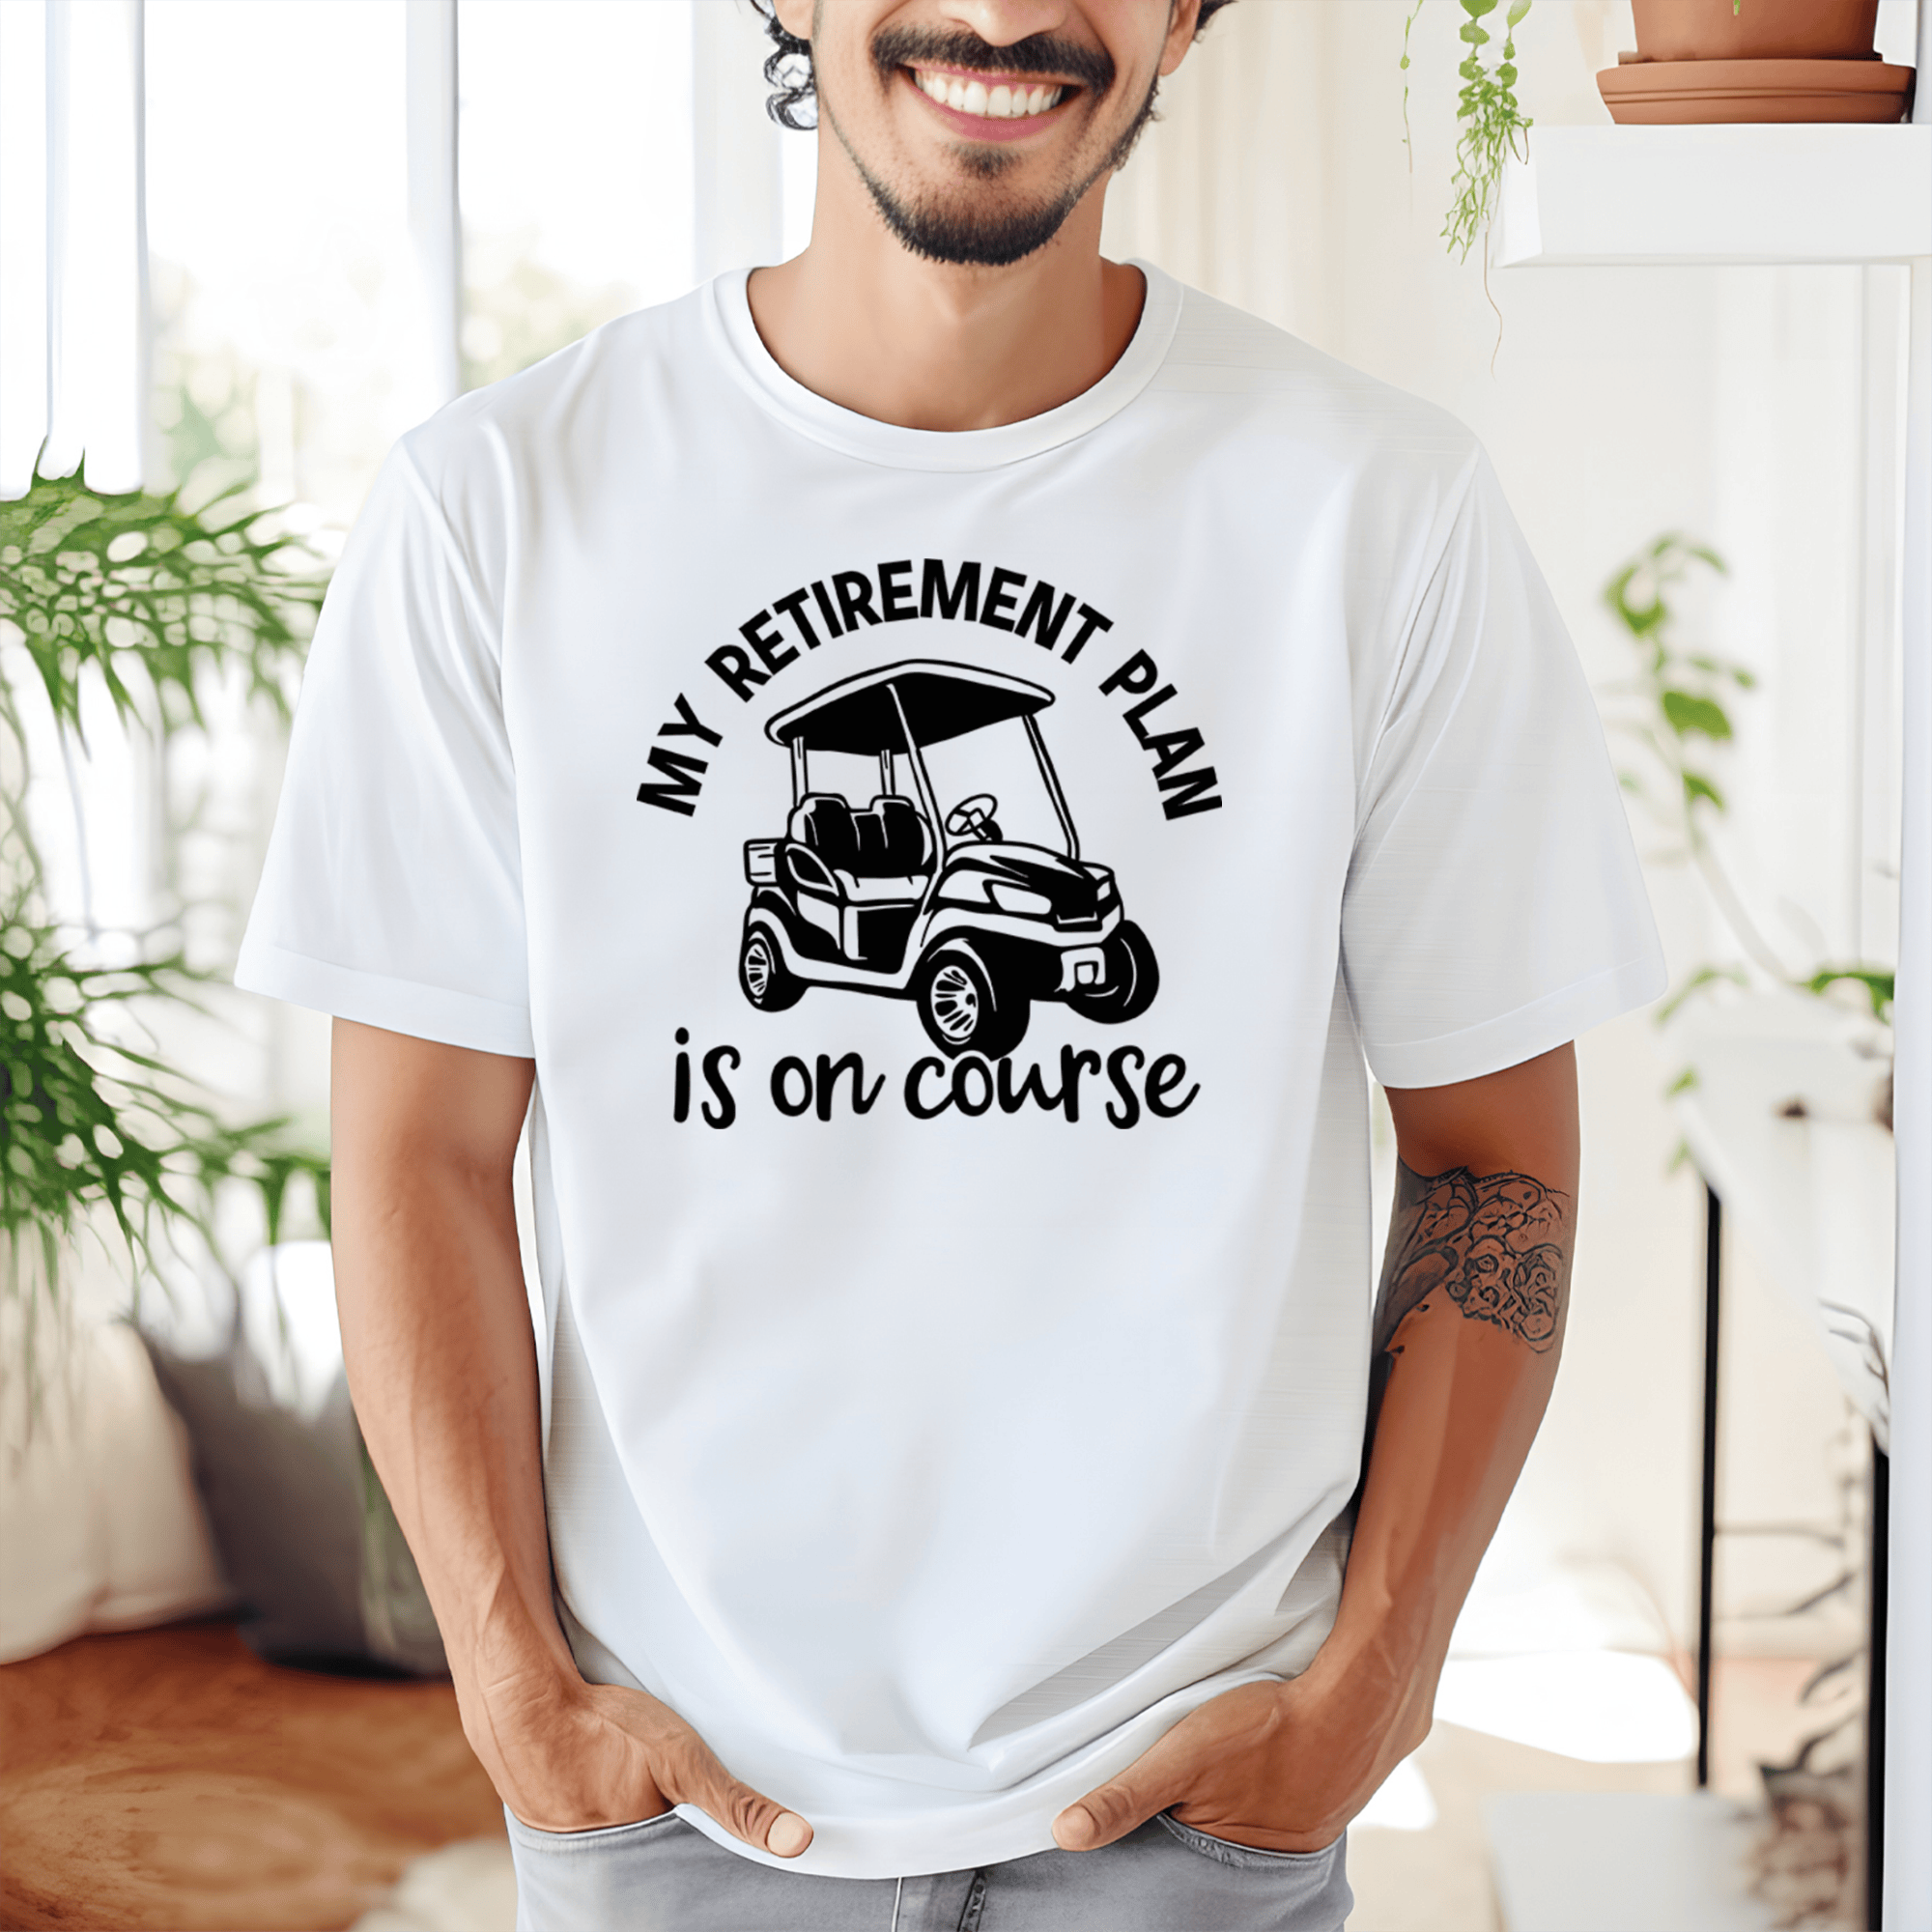 White Mens T-Shirt With My Retirement Plan Is On Course Design